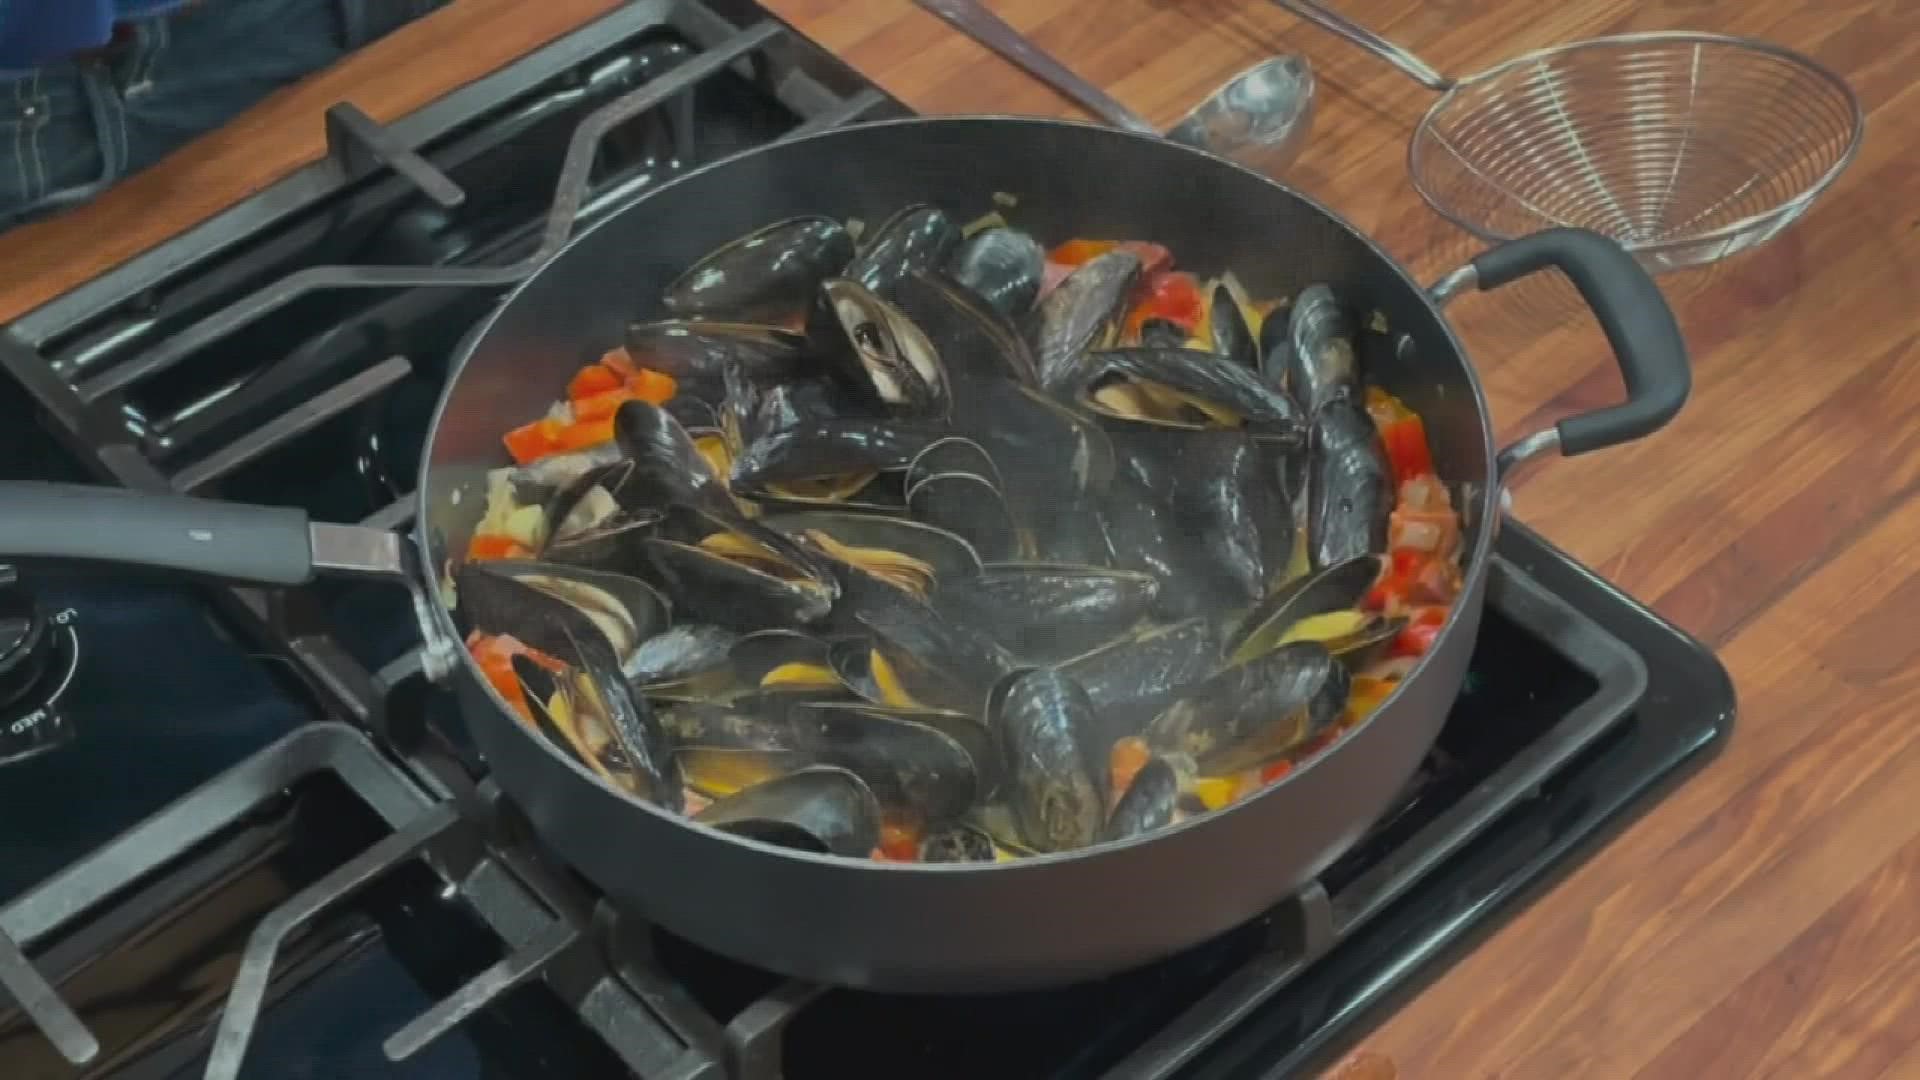 The Gentlemen Farmer in Maine shares their recipe for cooking fresh Maine mussels.